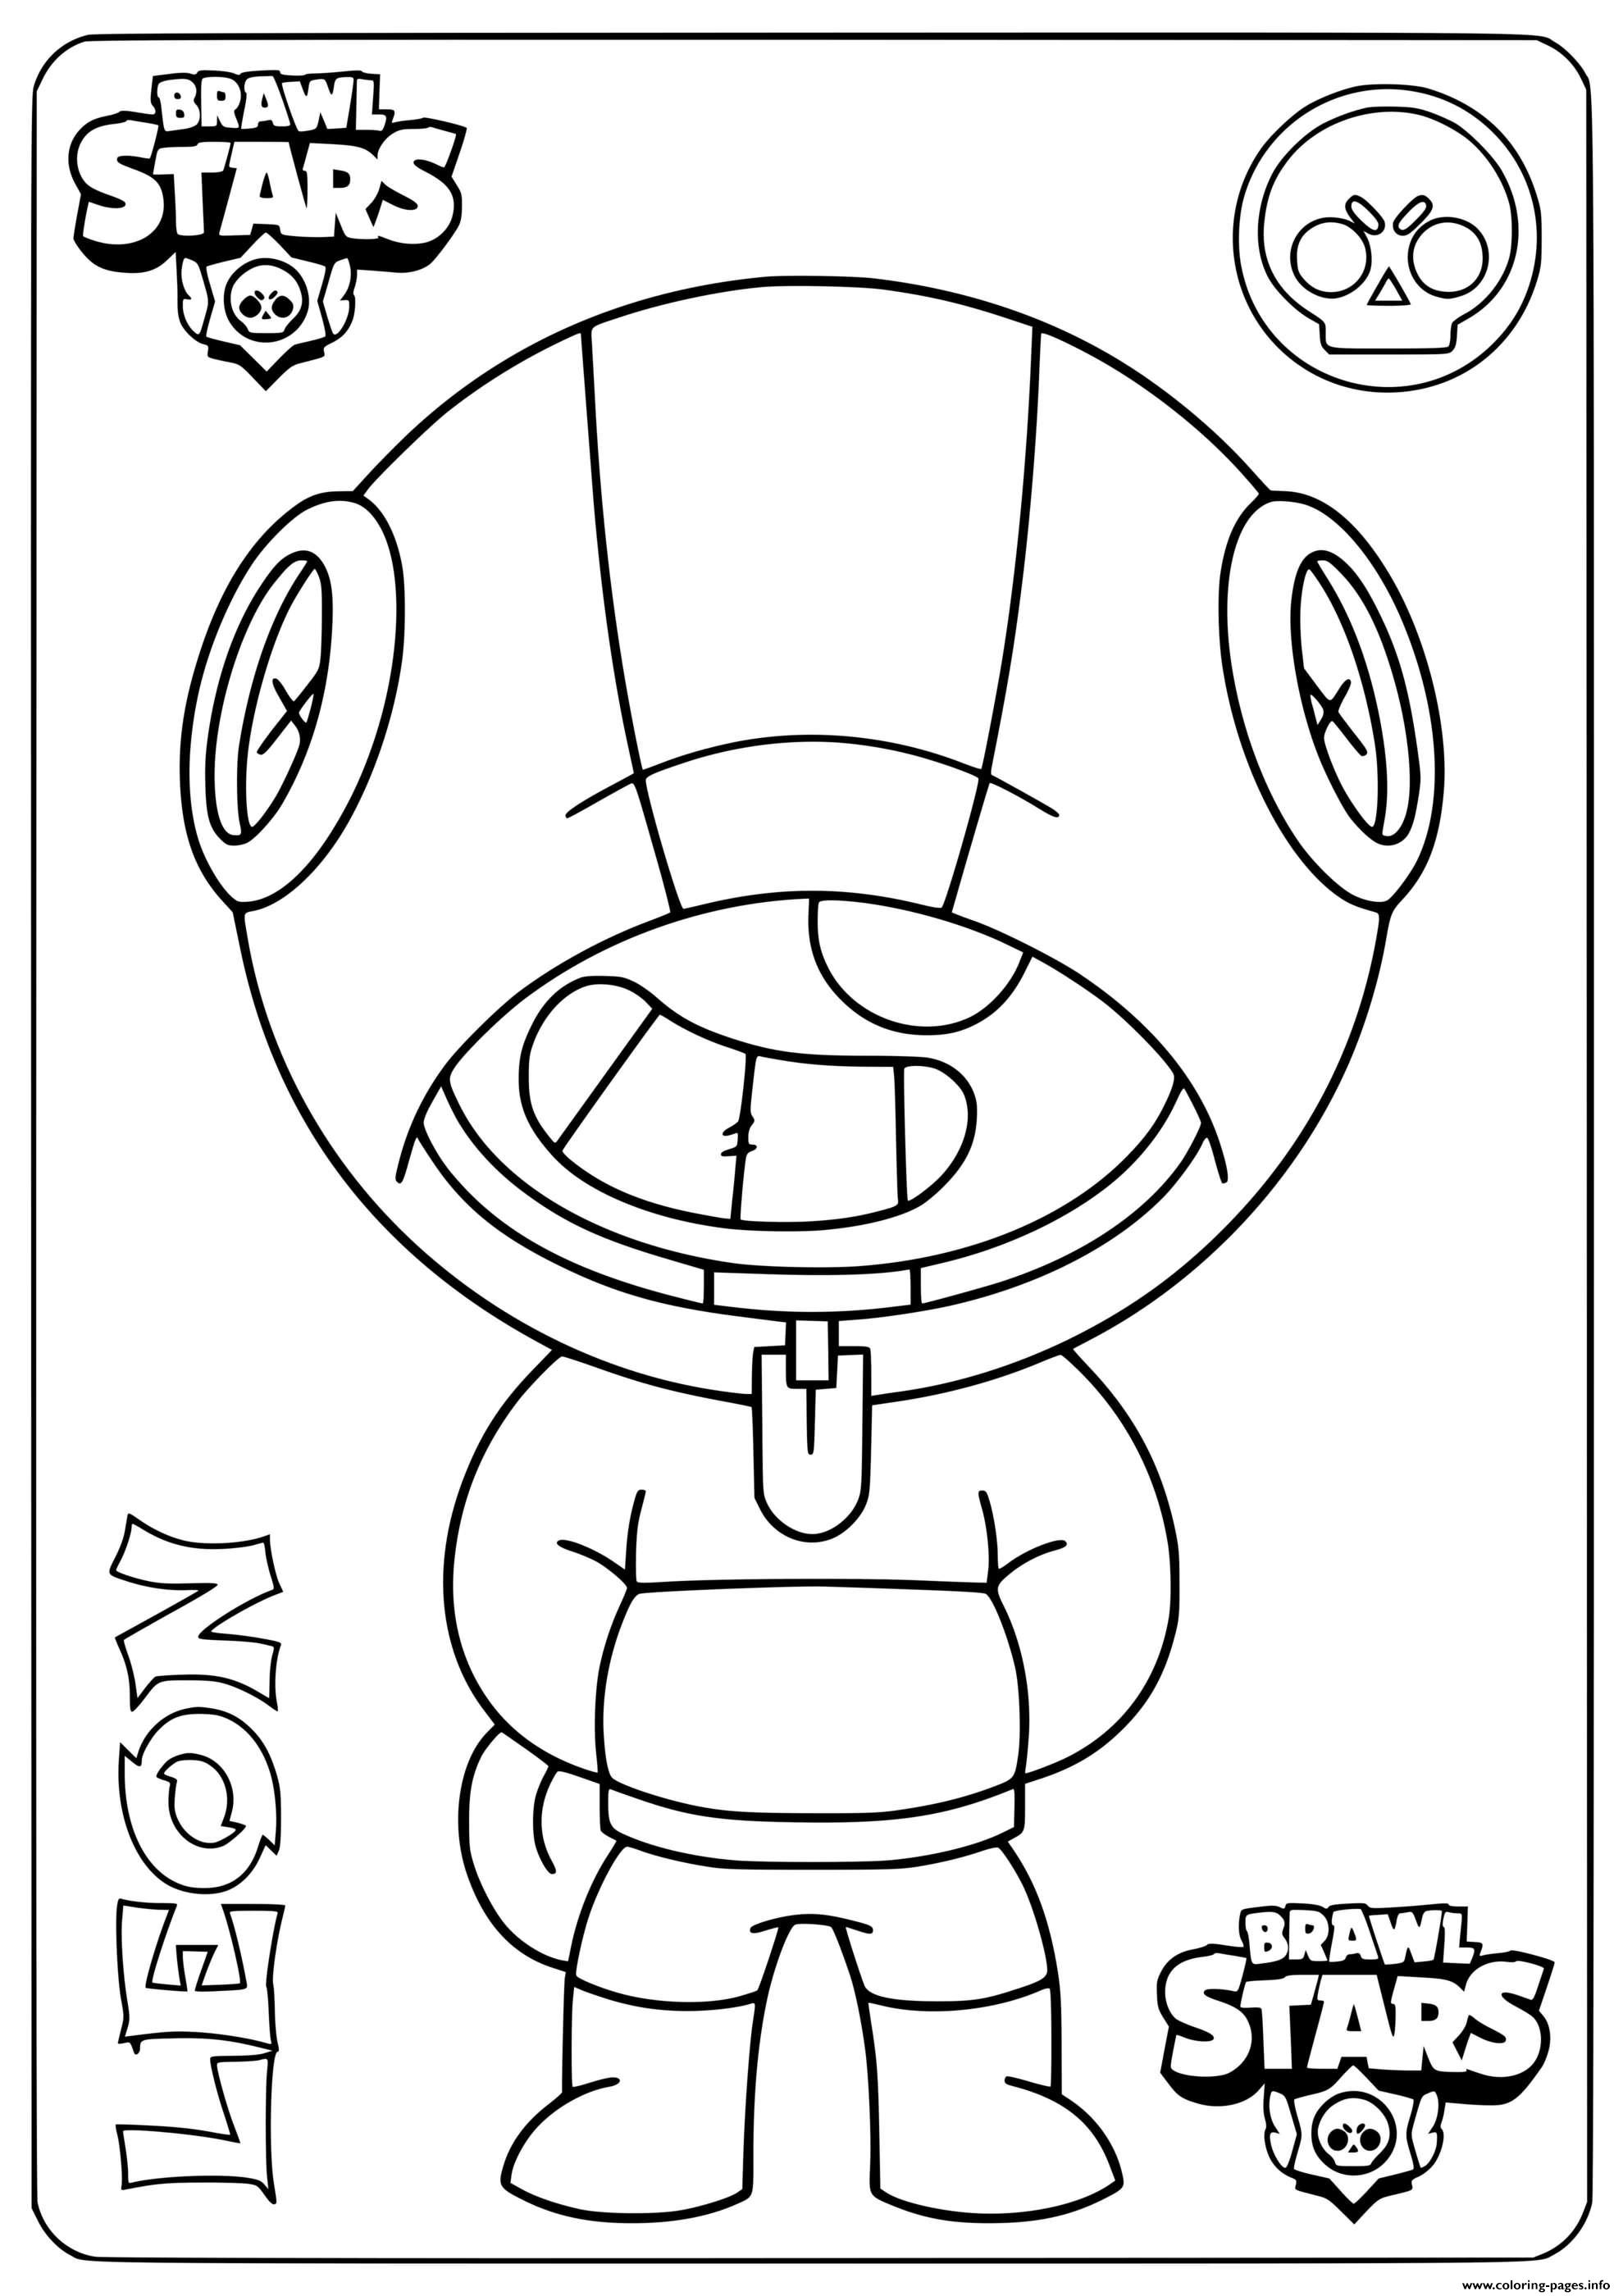 Leon Brawl Stars Coloring Page Snoopy Coloring Pages Star Coloring My